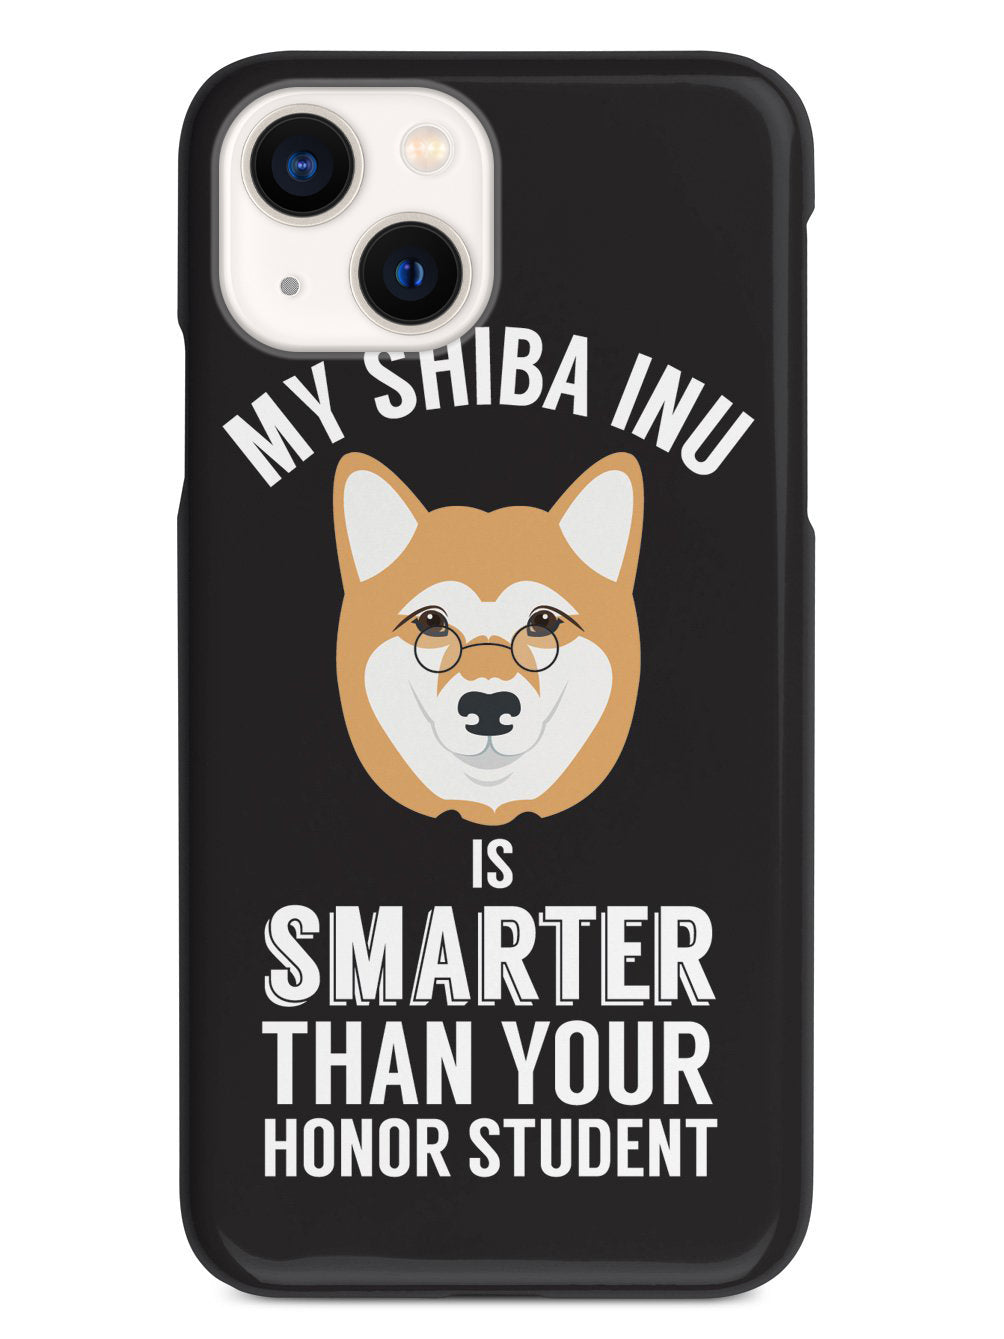 Smarter Than Your Honor Student - Shiba Inu Case